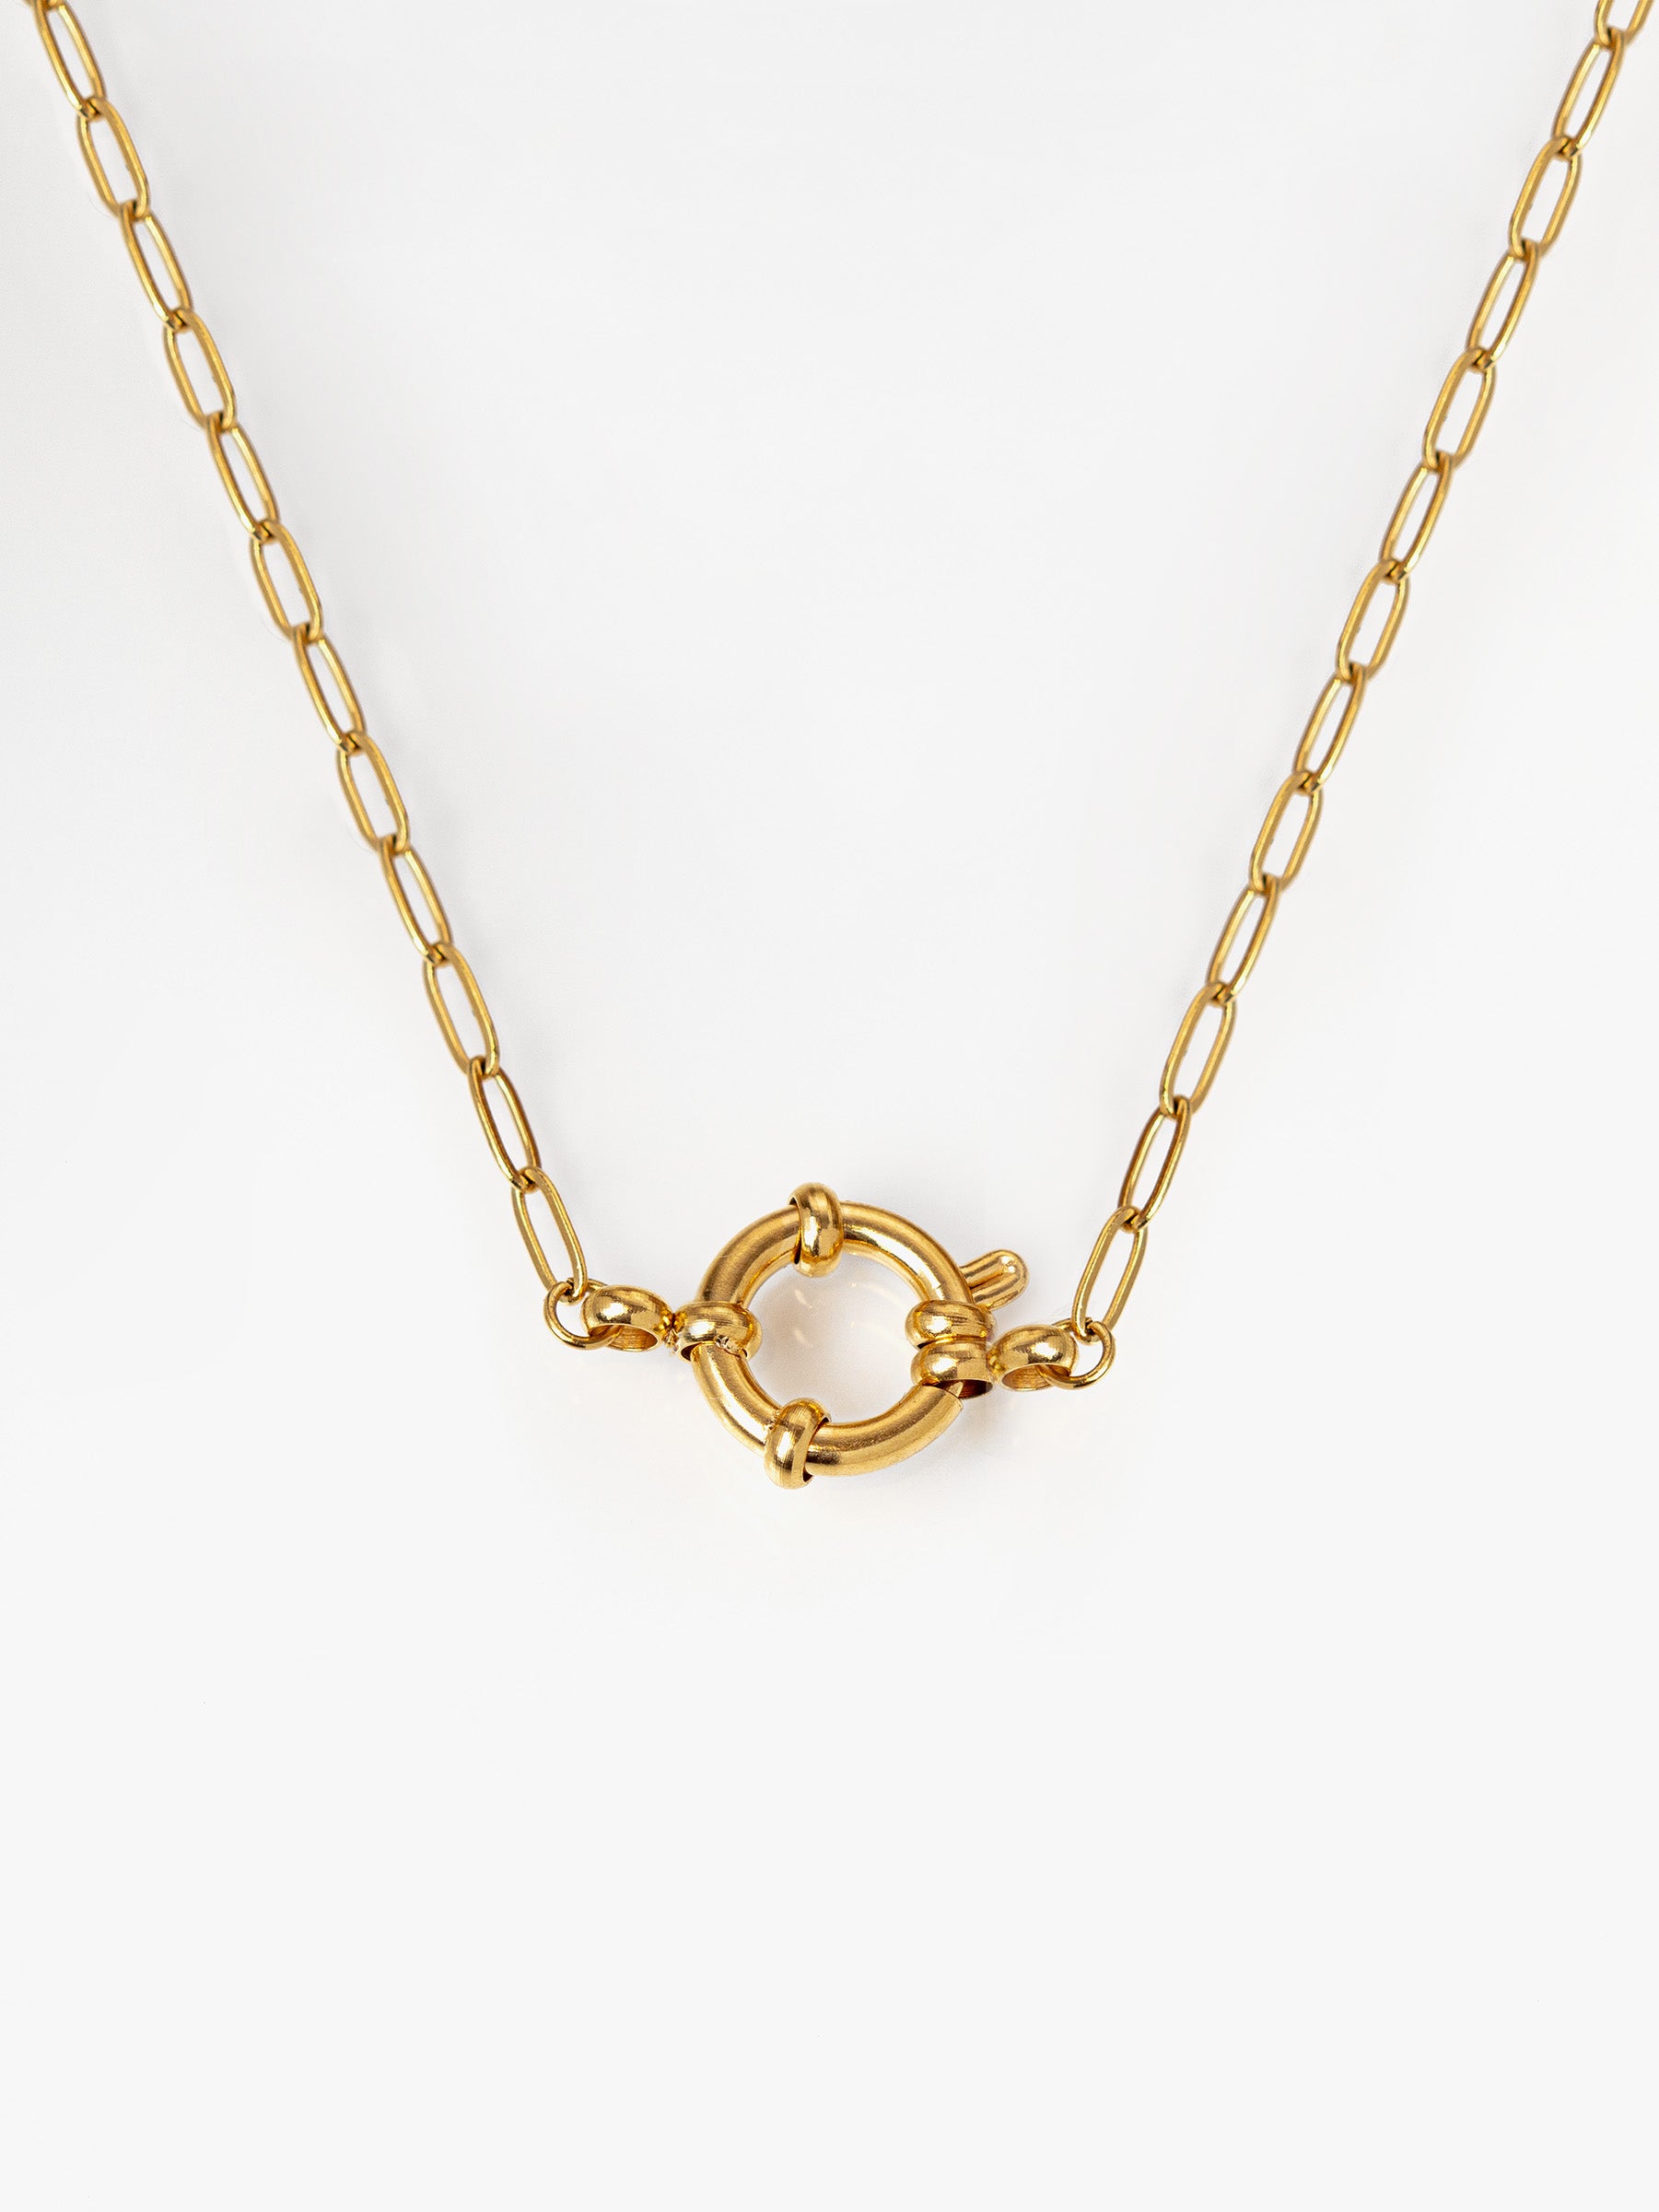 Gold Dainty Link Chain For Charms - 40cm short